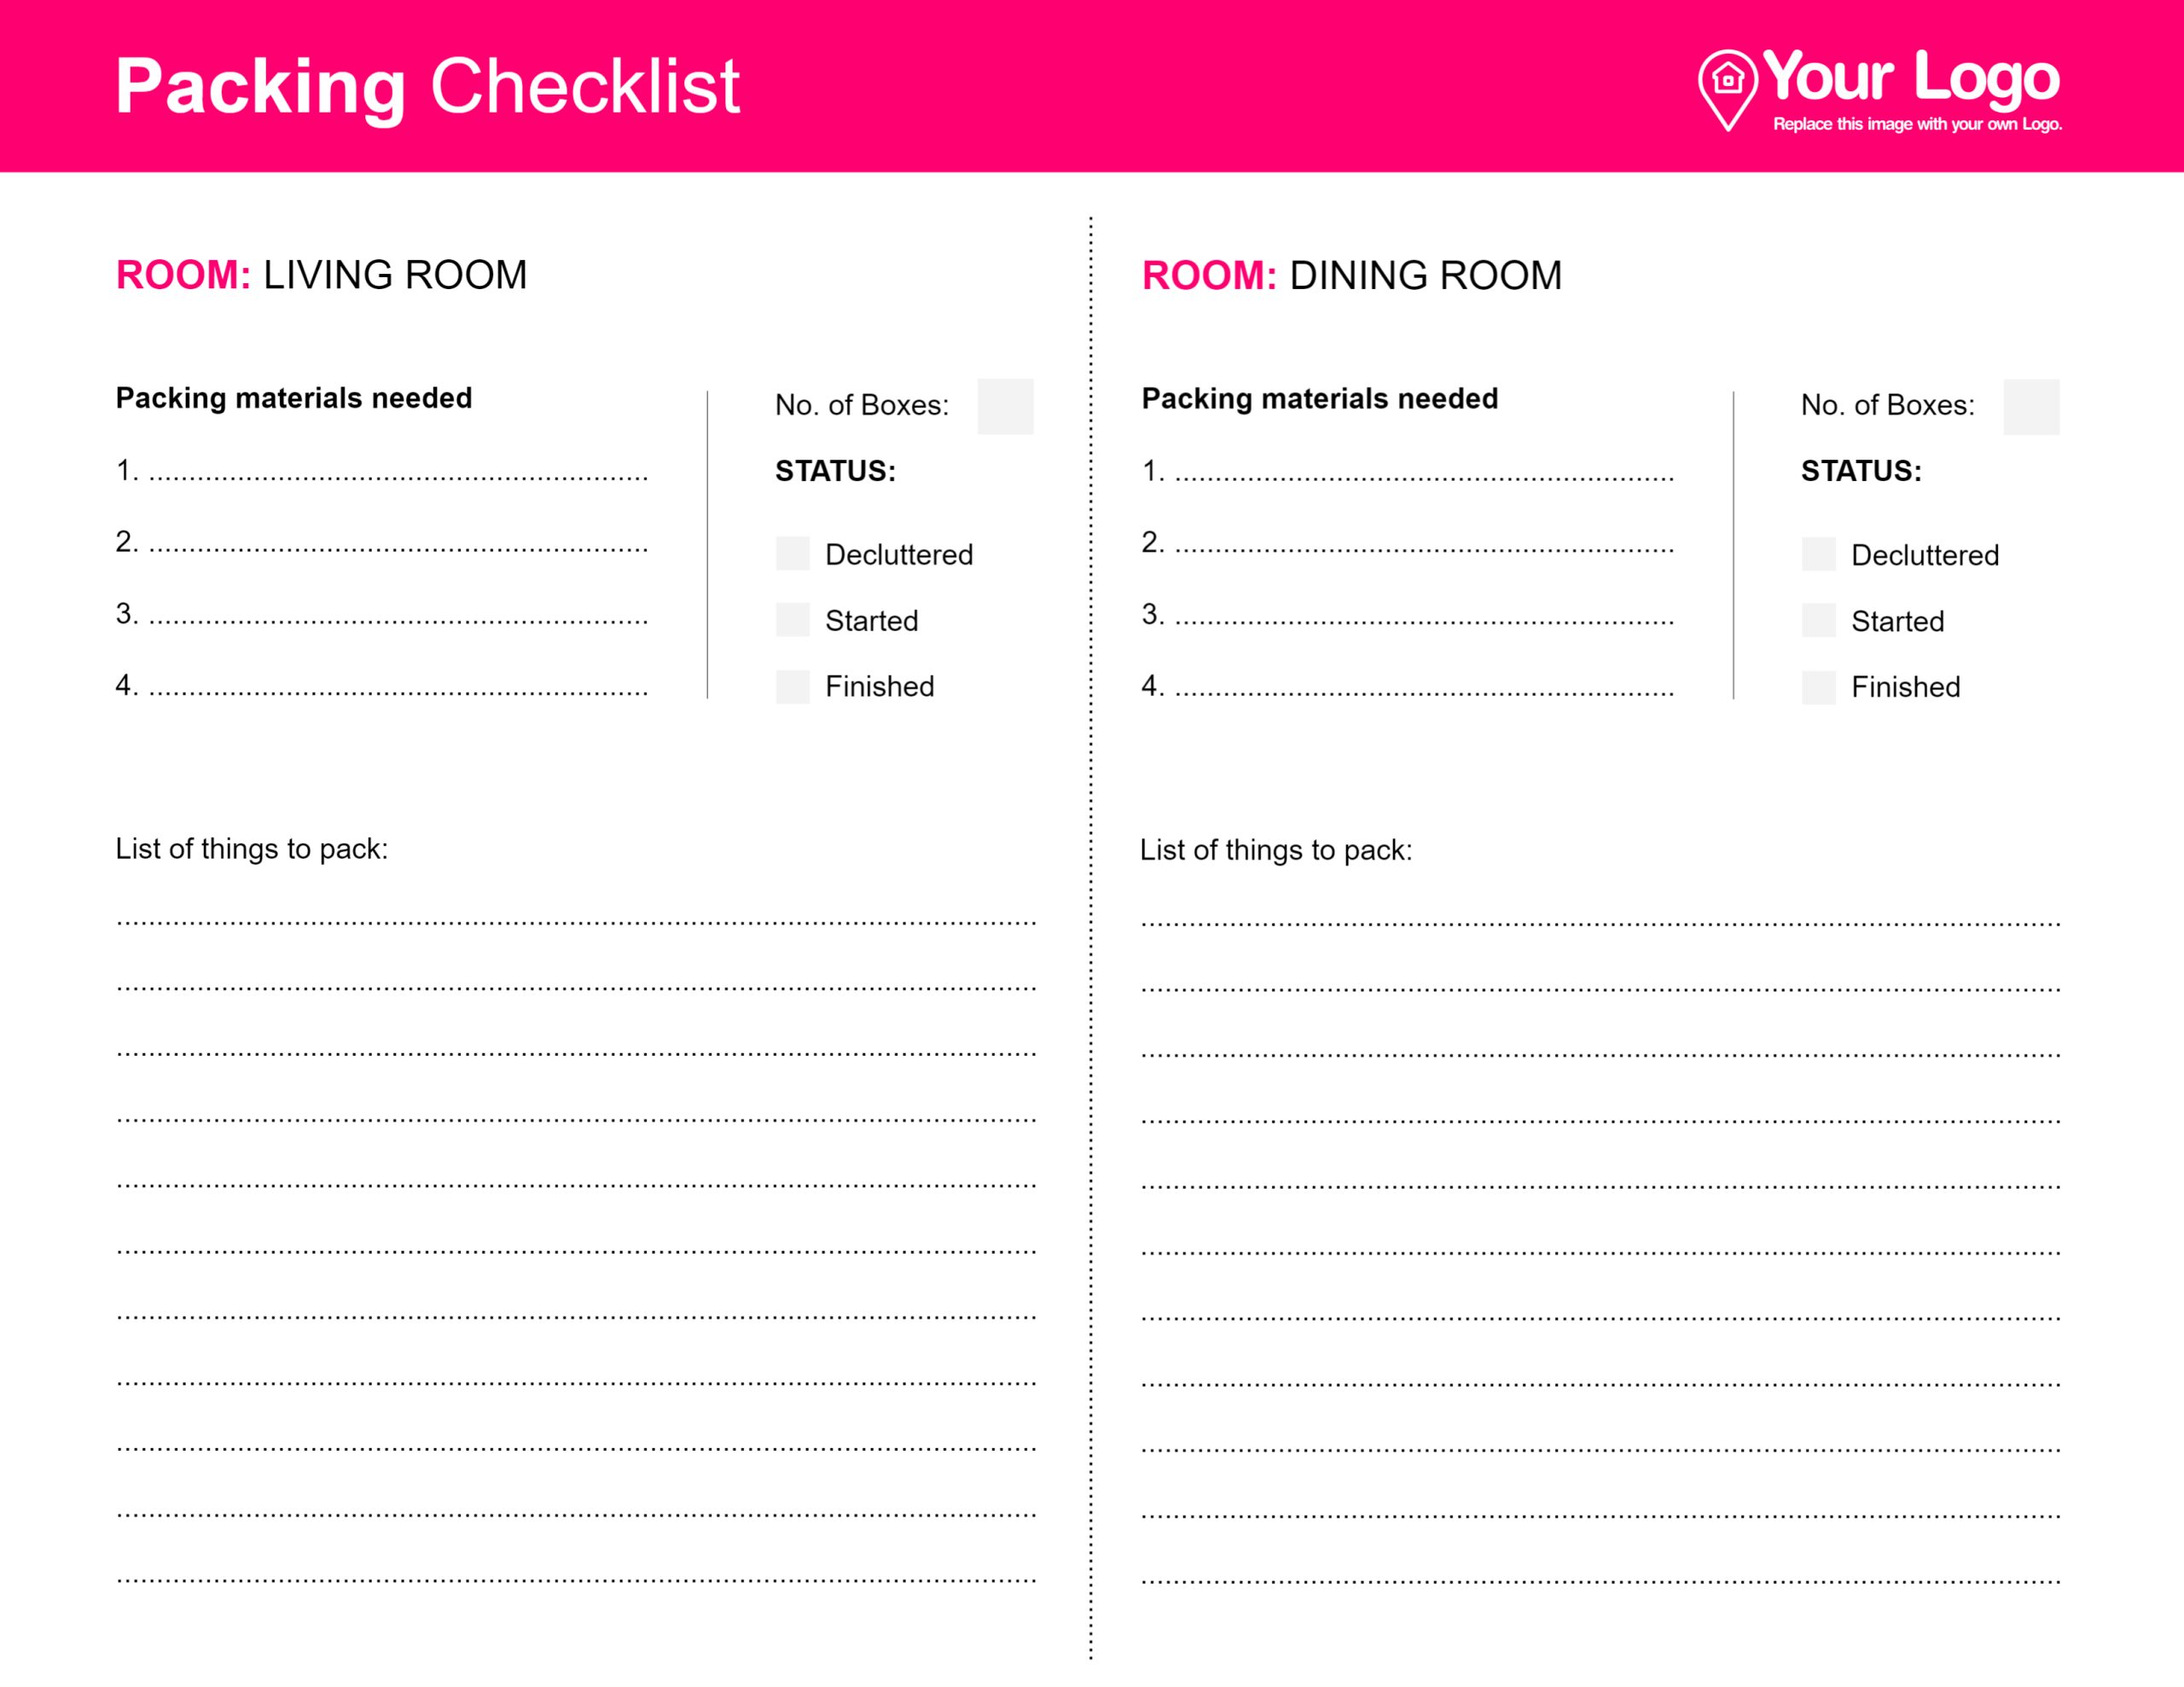 Real estate checklist for packing